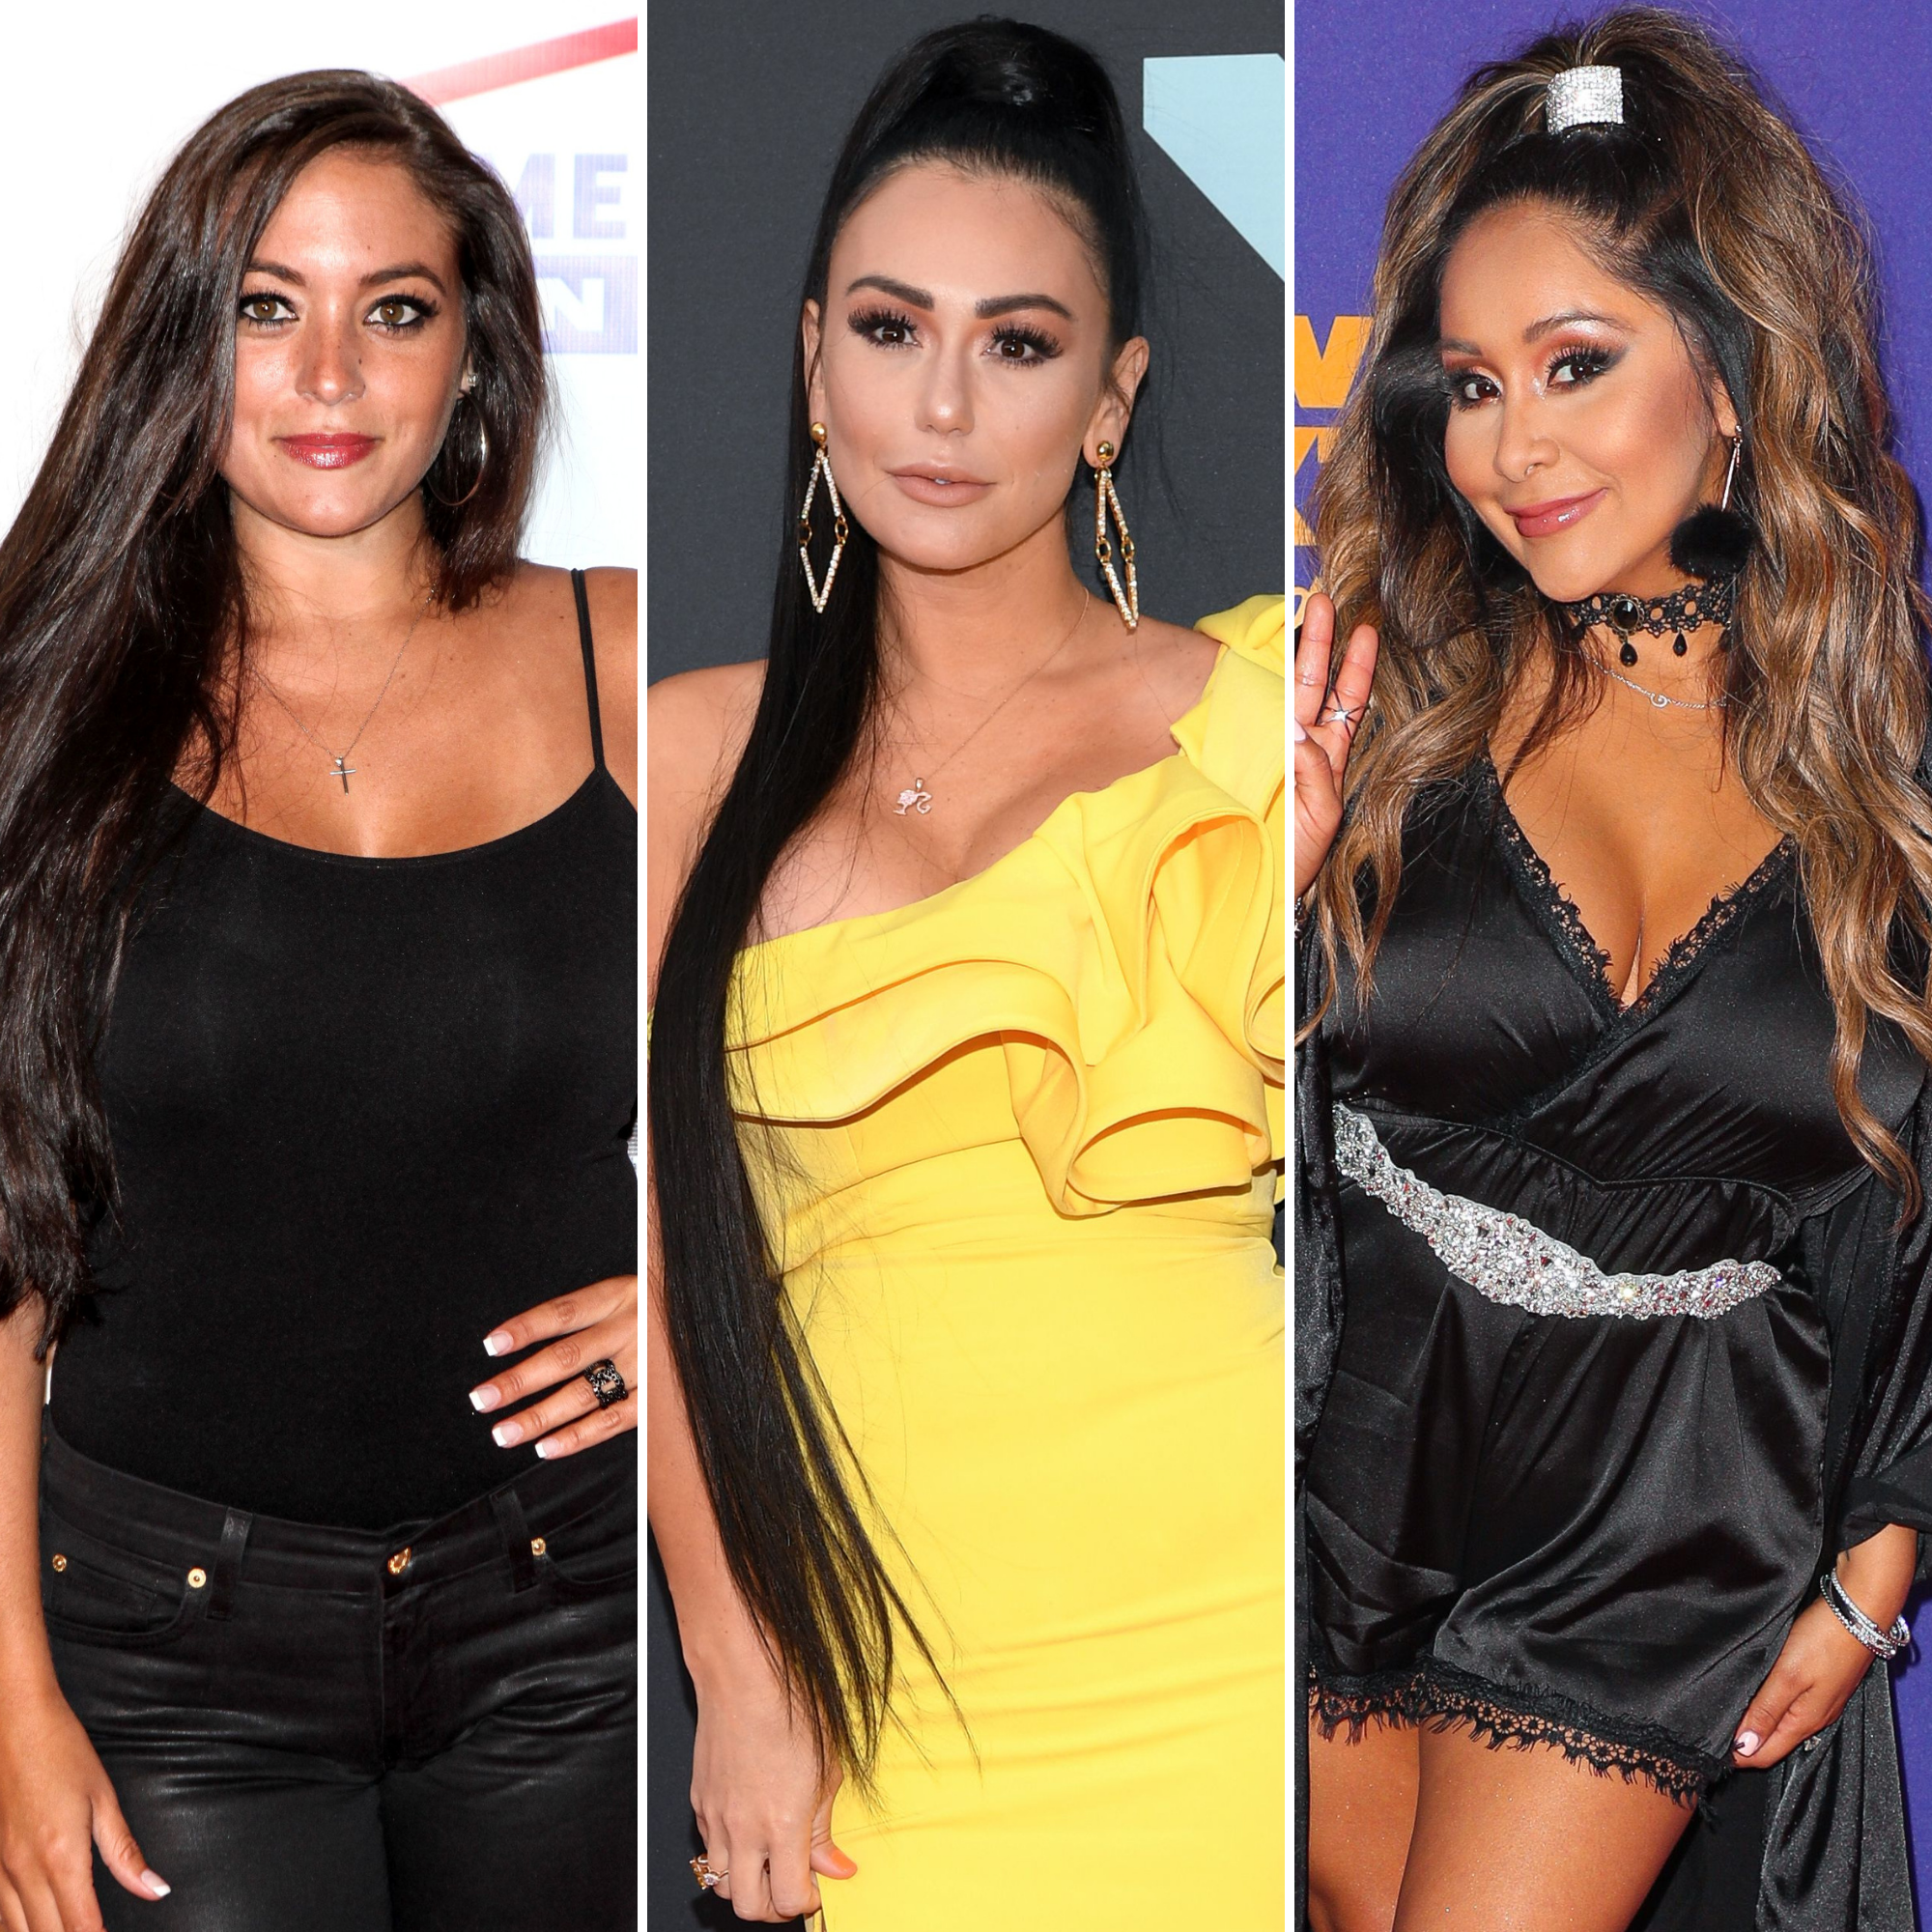 Snooki From Jersey Shore, The Iconic Reality TV Stars You Should Dress  Up as For Halloween